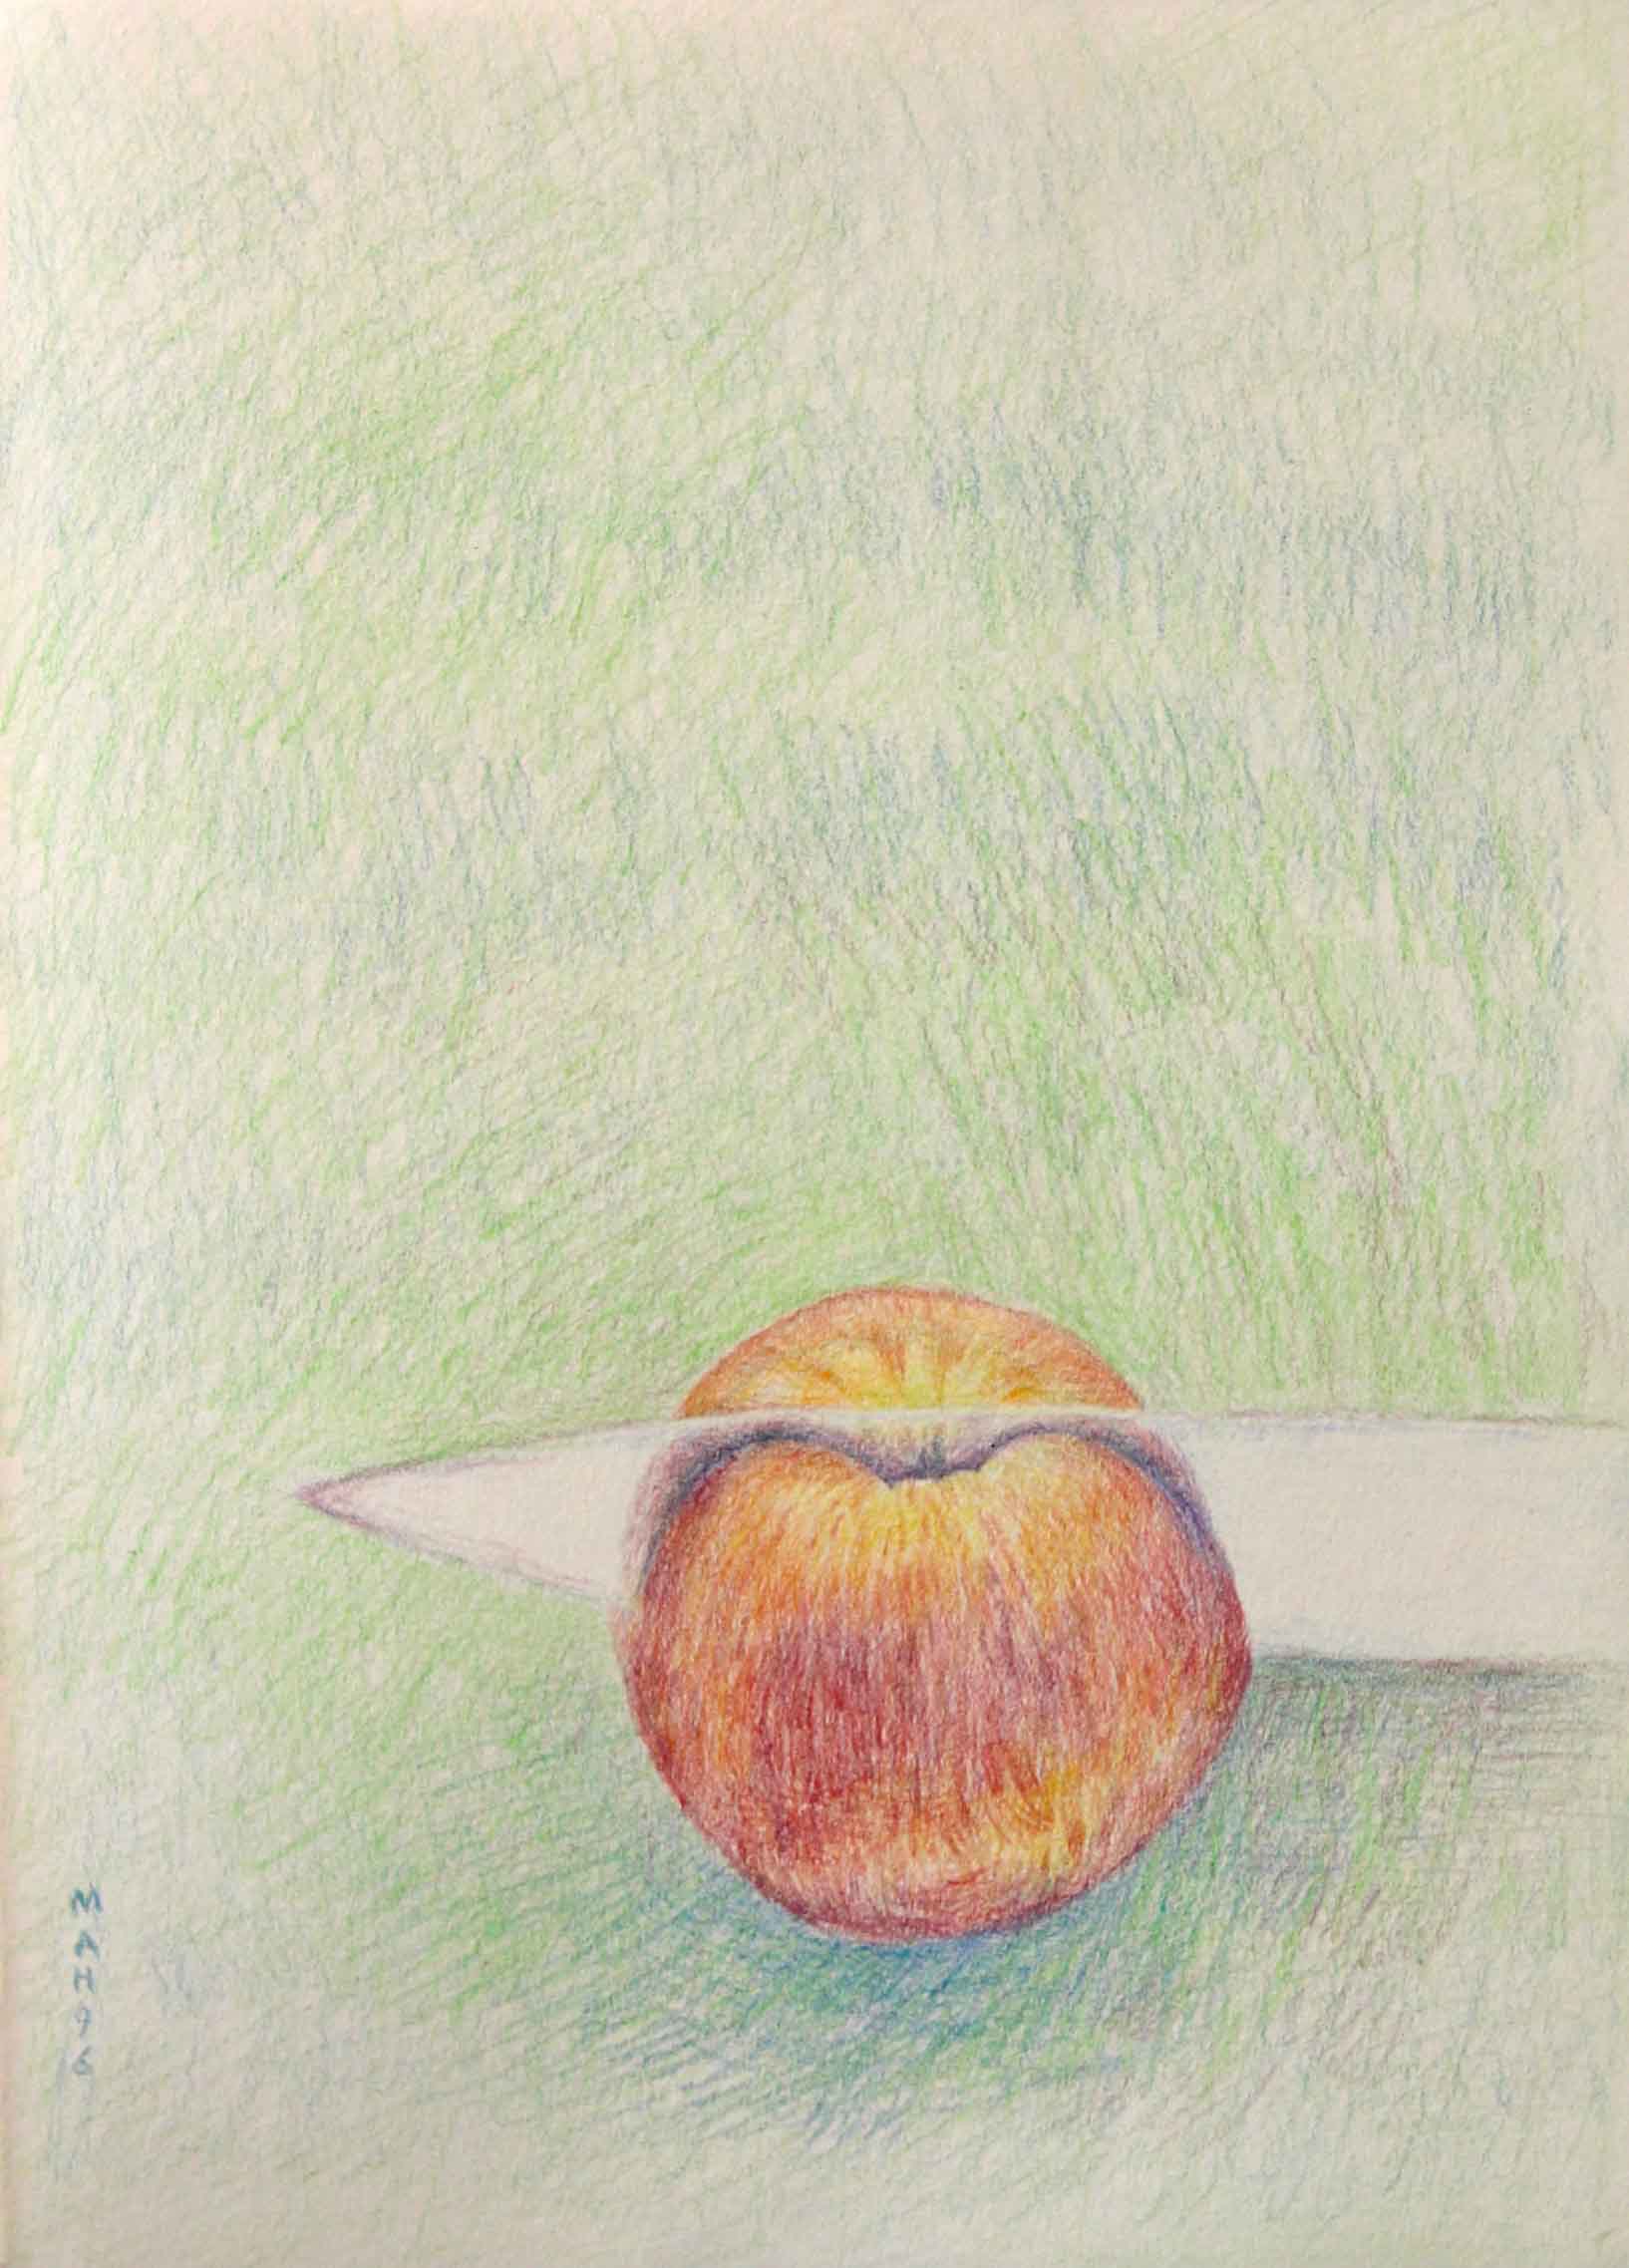 Mahsa Mohamadi, Untitled, 2017, Colored pencil on paper, 18.5 x 26 cm